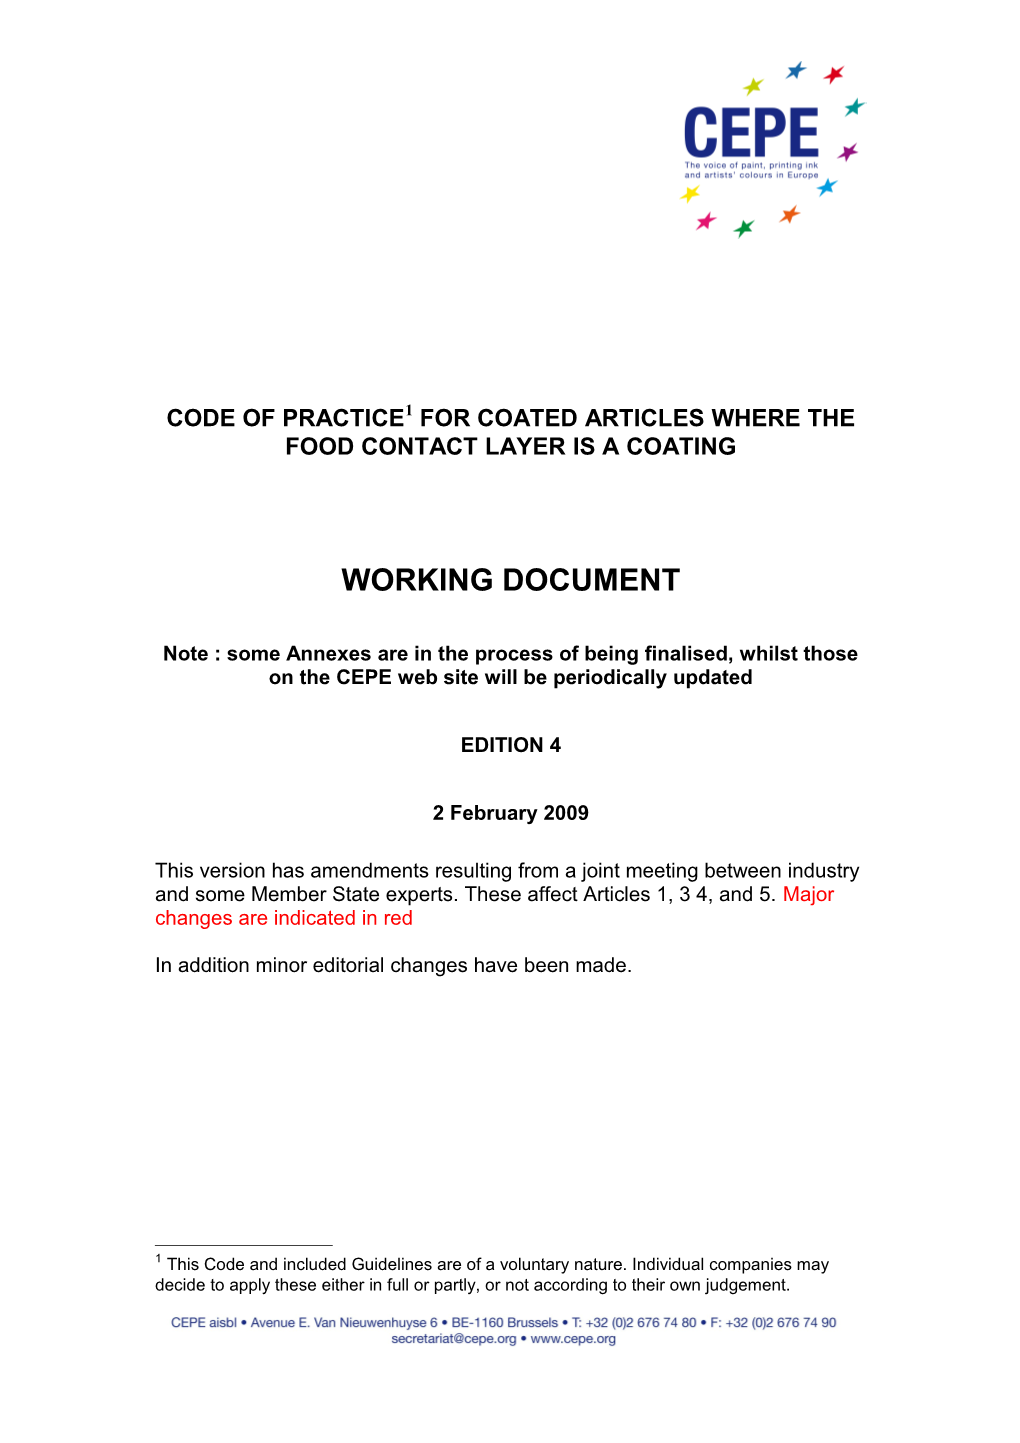 Code of Practice for Coated Articles Where the Food Contact Layer Is a Coating